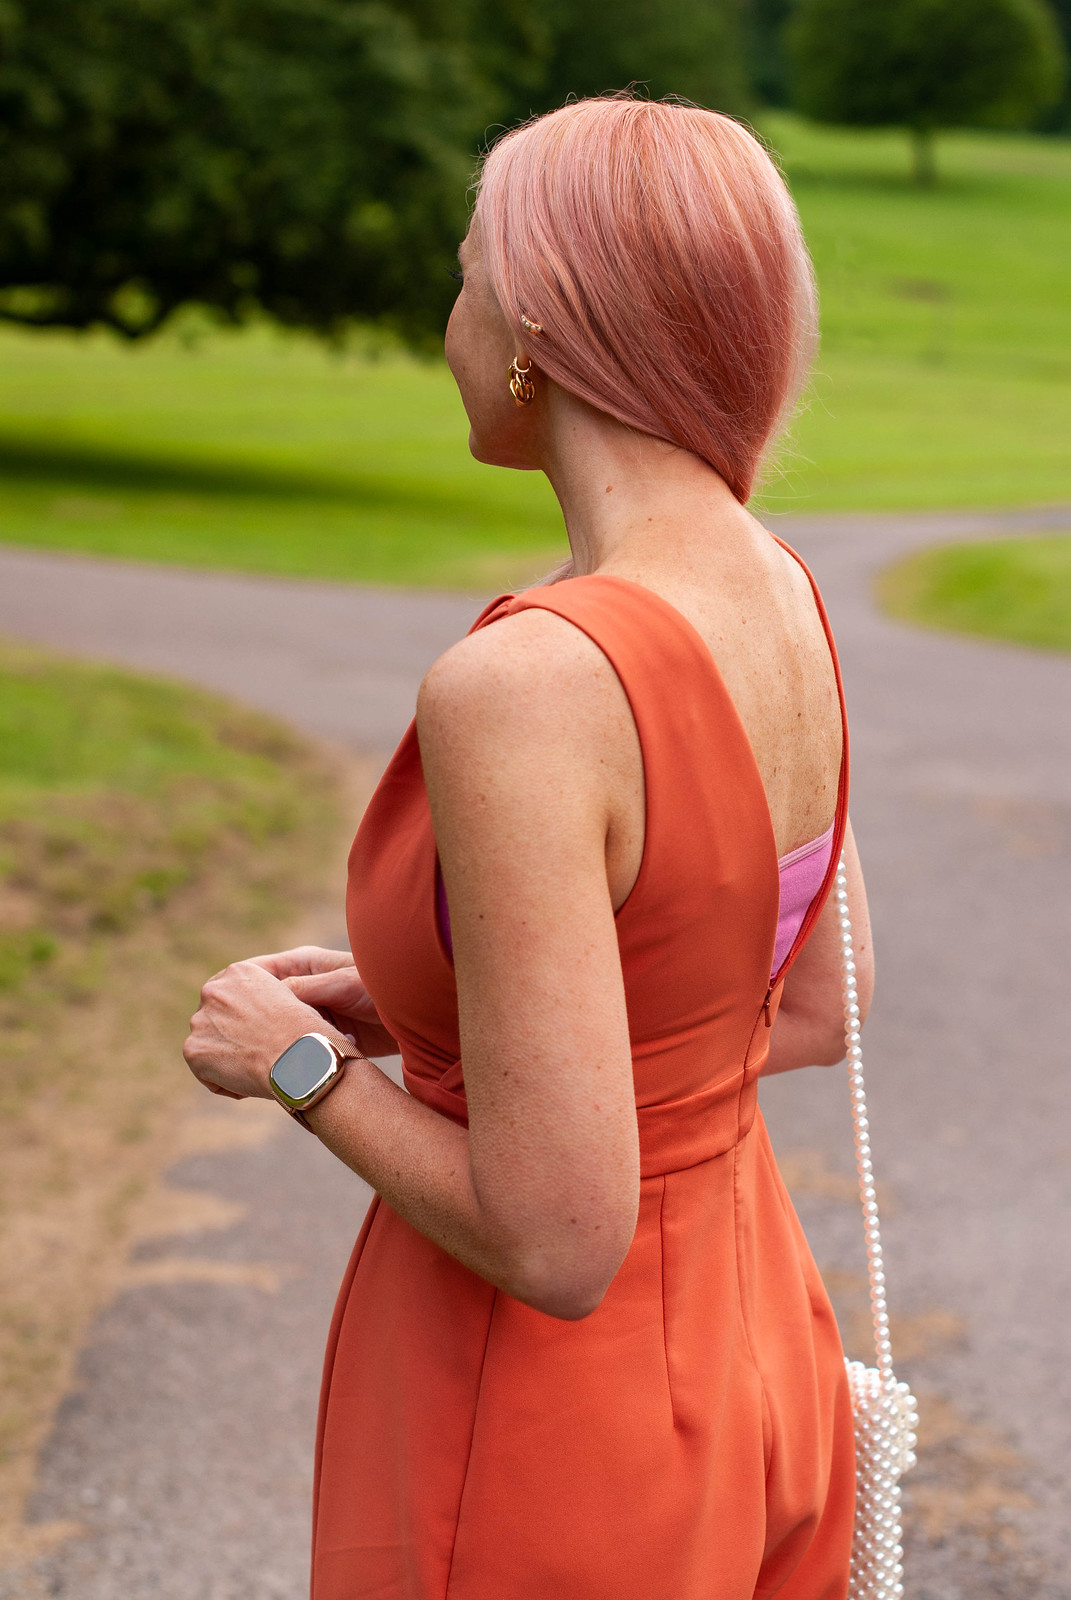 What to Wear to a Wedding Evening Reception: Orange v-neck jumpsuit, orange strappy heels, pearl phone holder | Catherine Summers, AKA Not Dressed As Lamb, Over 40 Fashion & Style